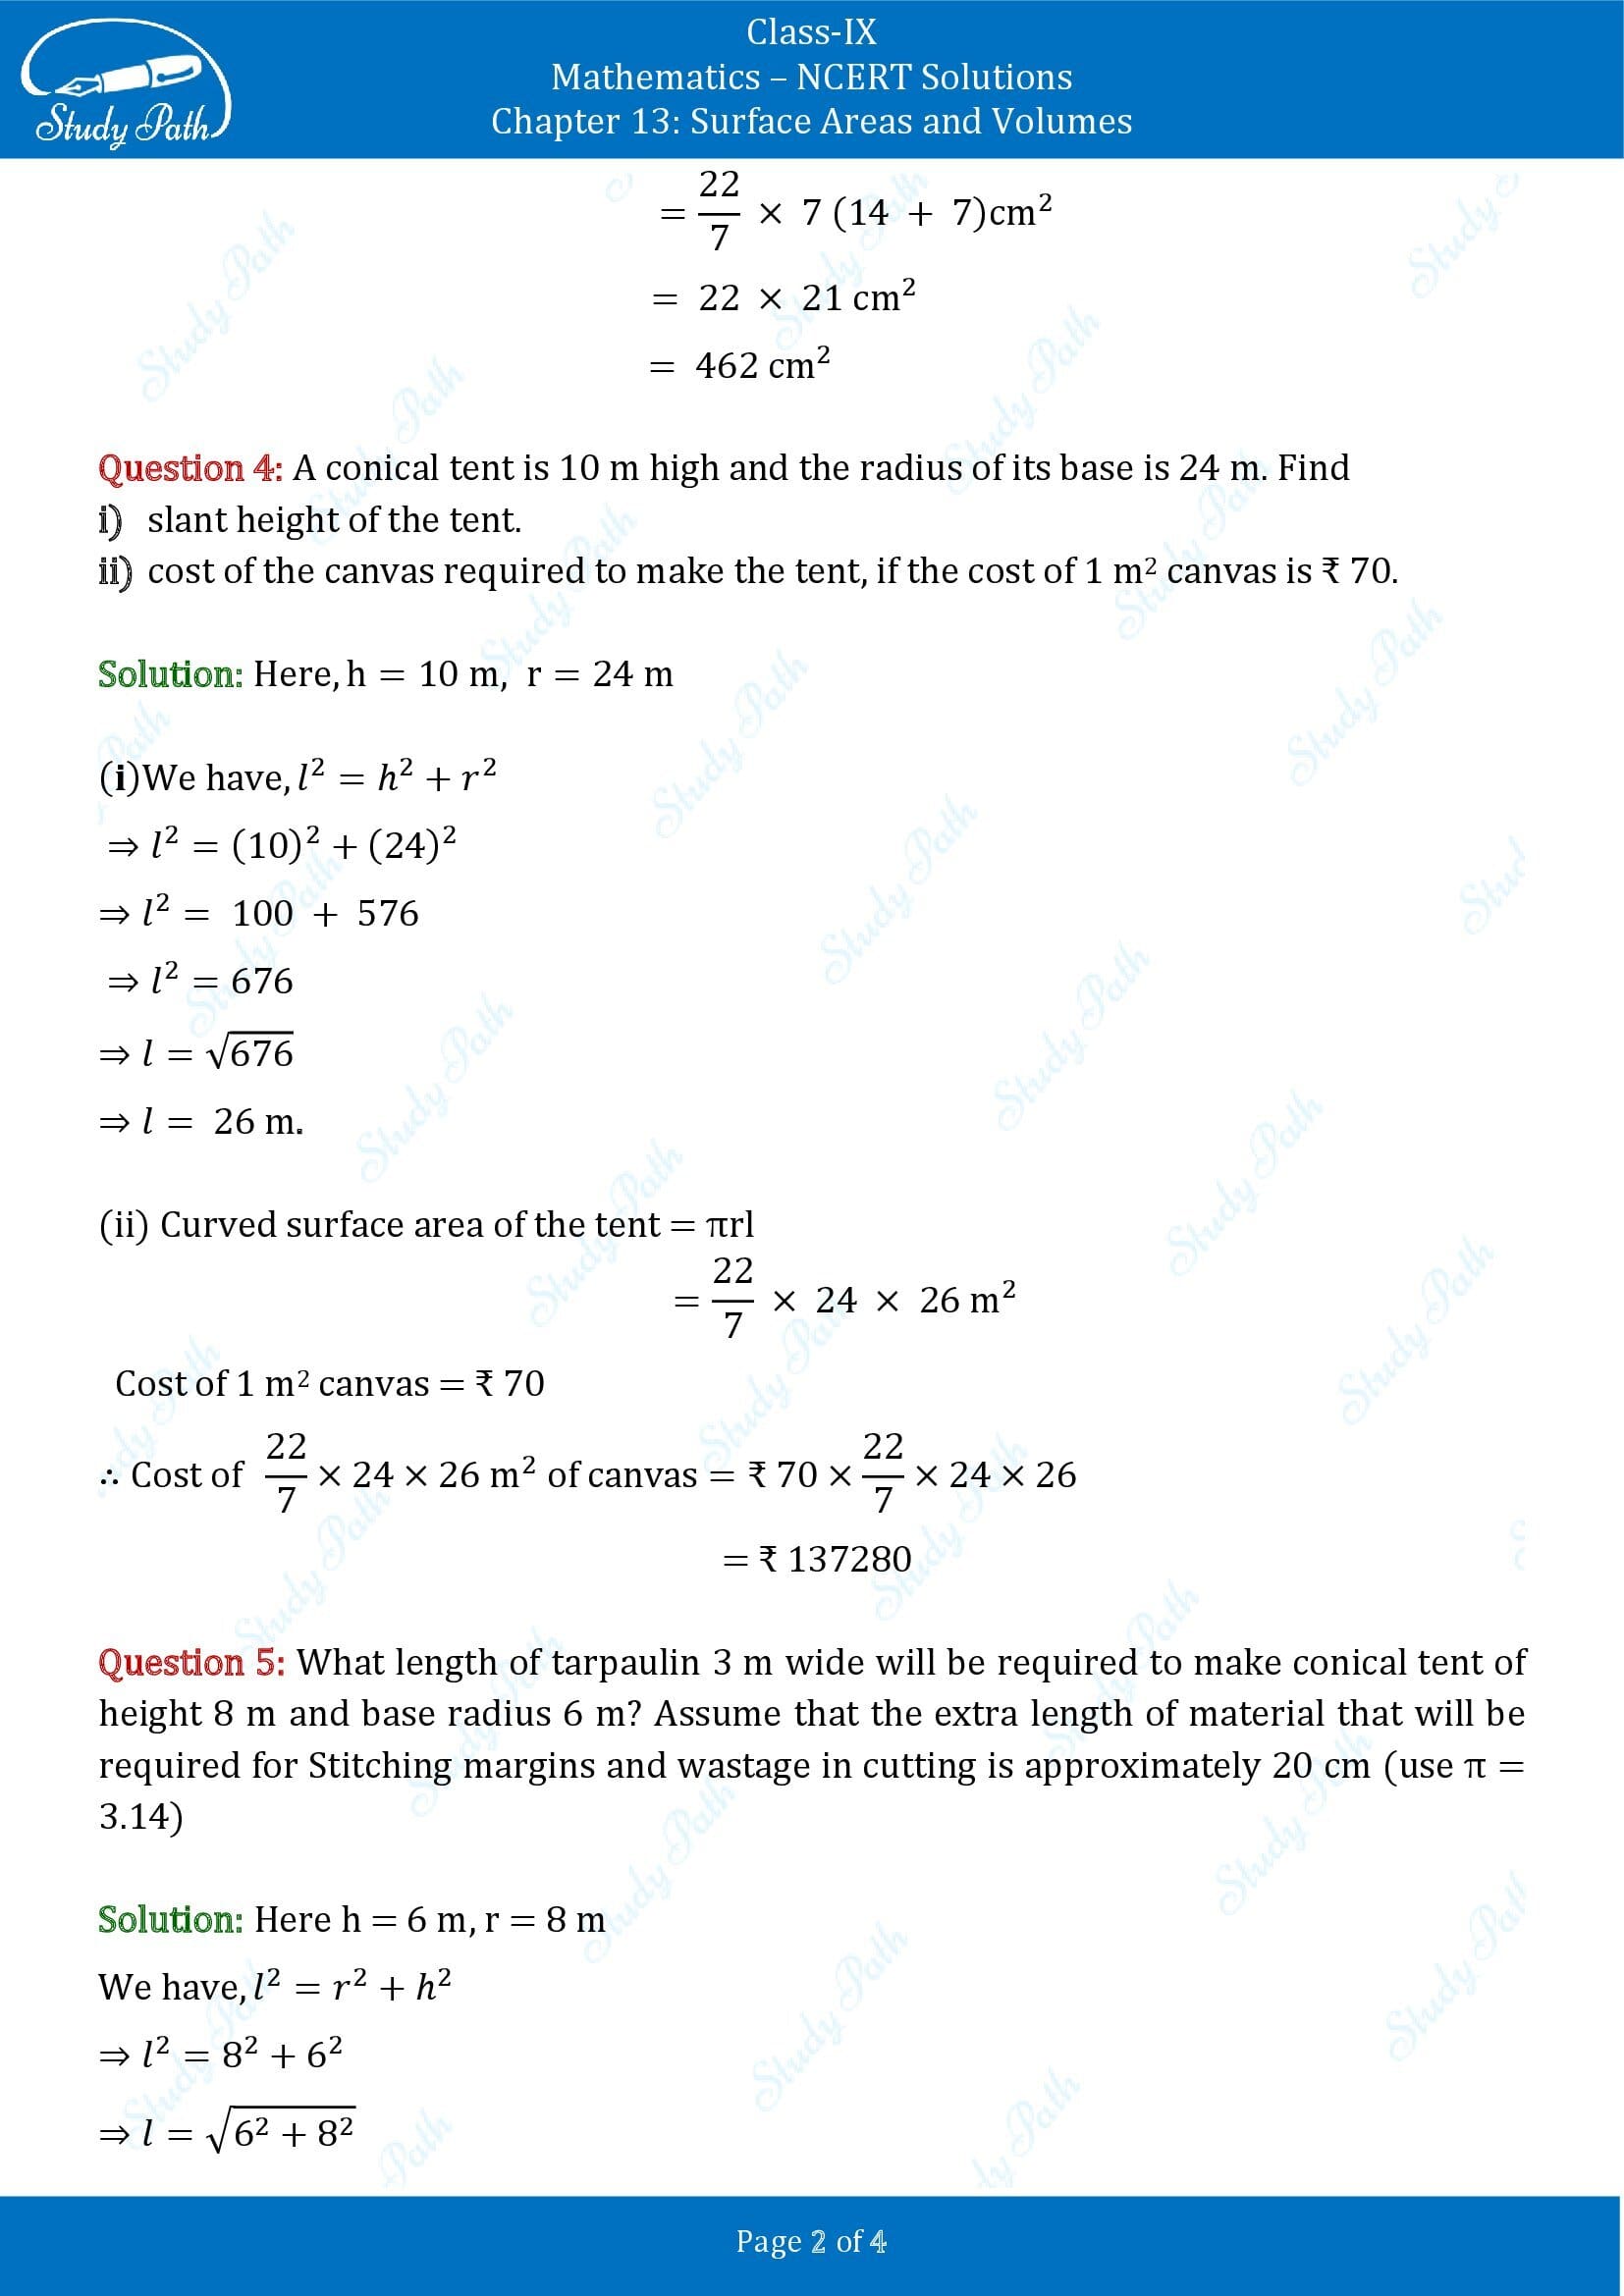 NCERT Solutions for Class 9 Maths Chapter 13 Surface Areas and Volumes Exercise 13.3 00002